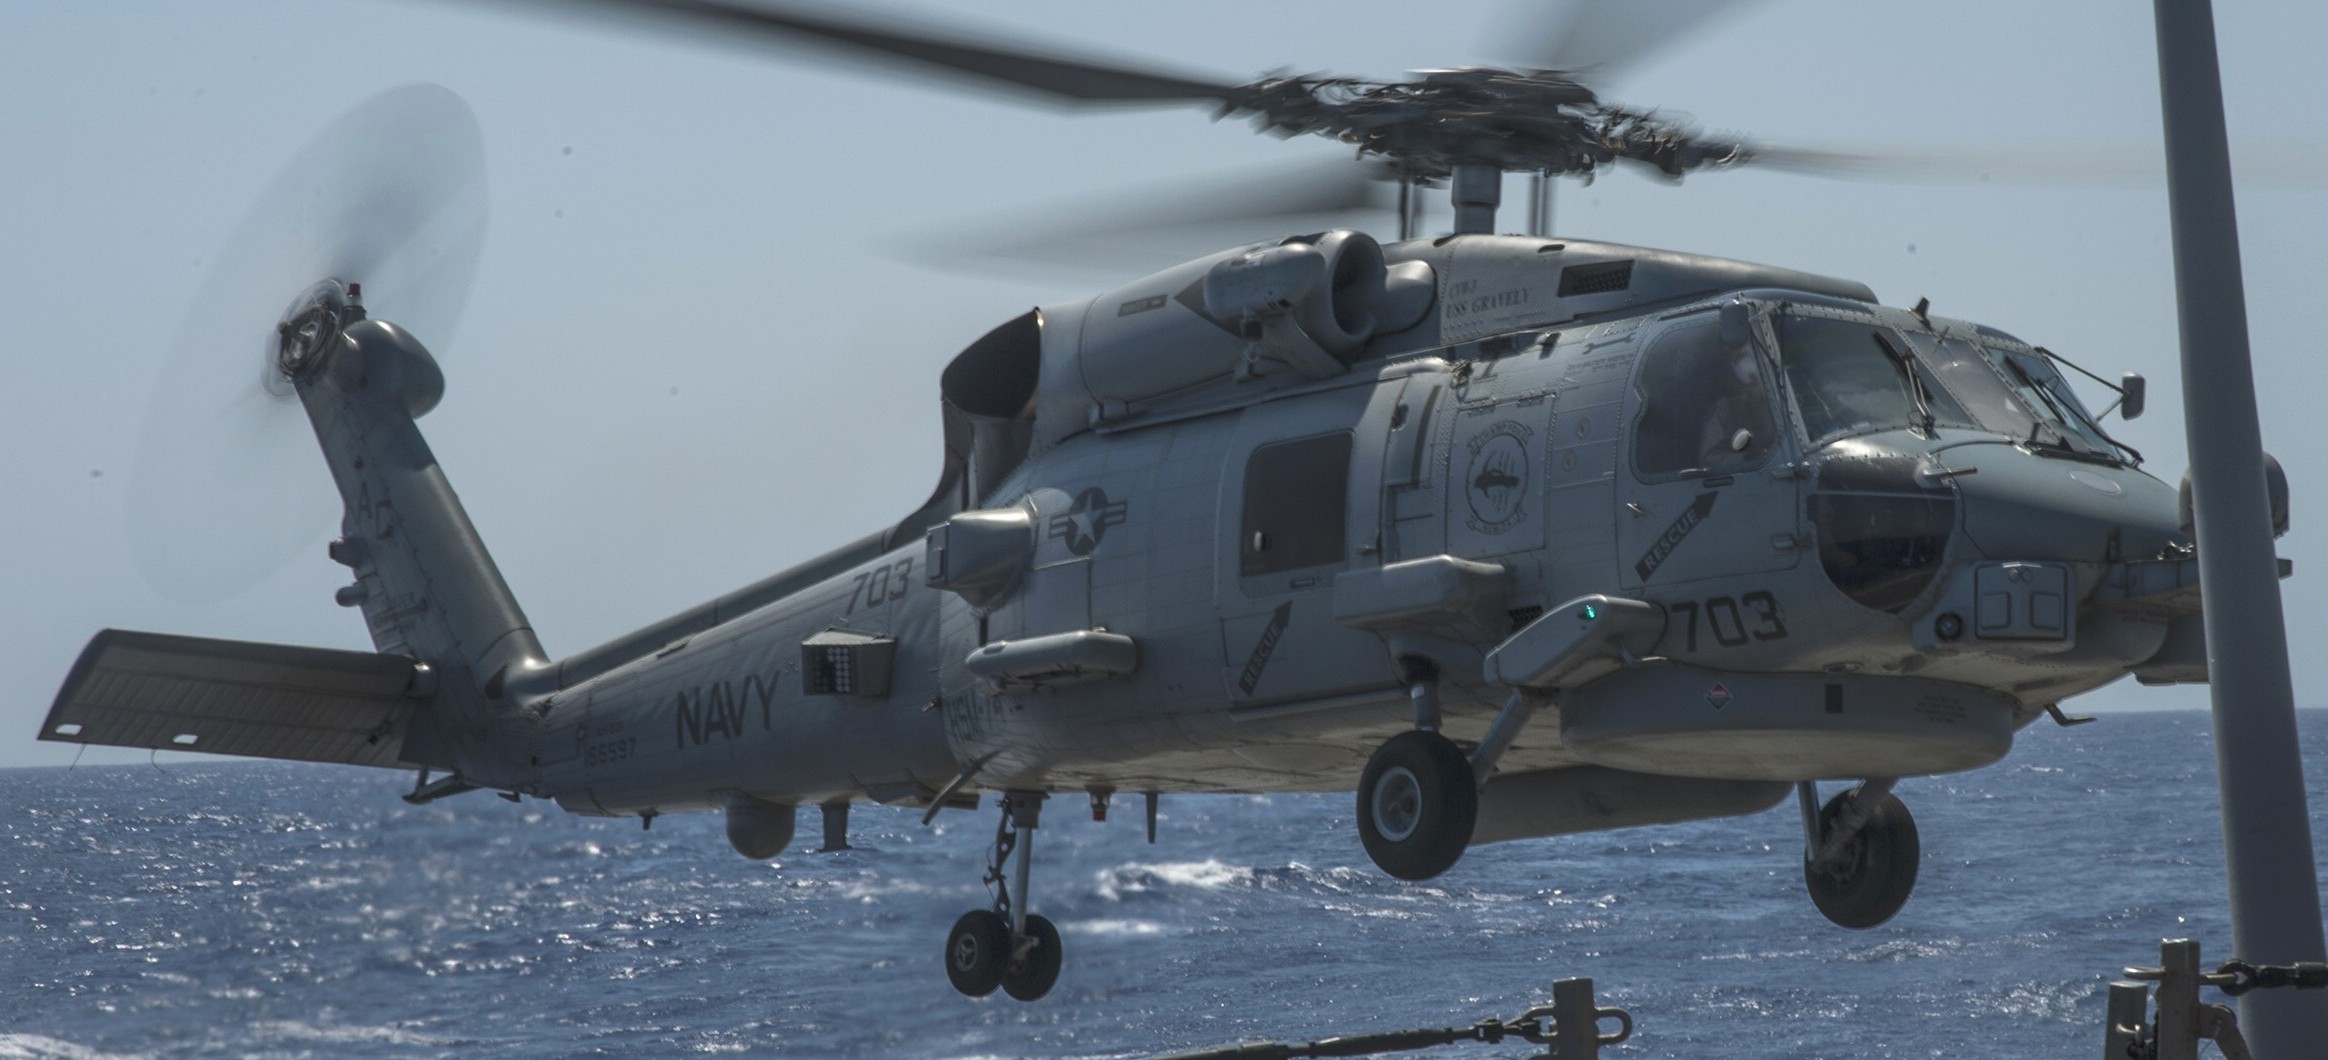 hsm-74 swamp foxes helicopter maritime strike squadron mh-60r seahawk ddg-55 uss stout 83